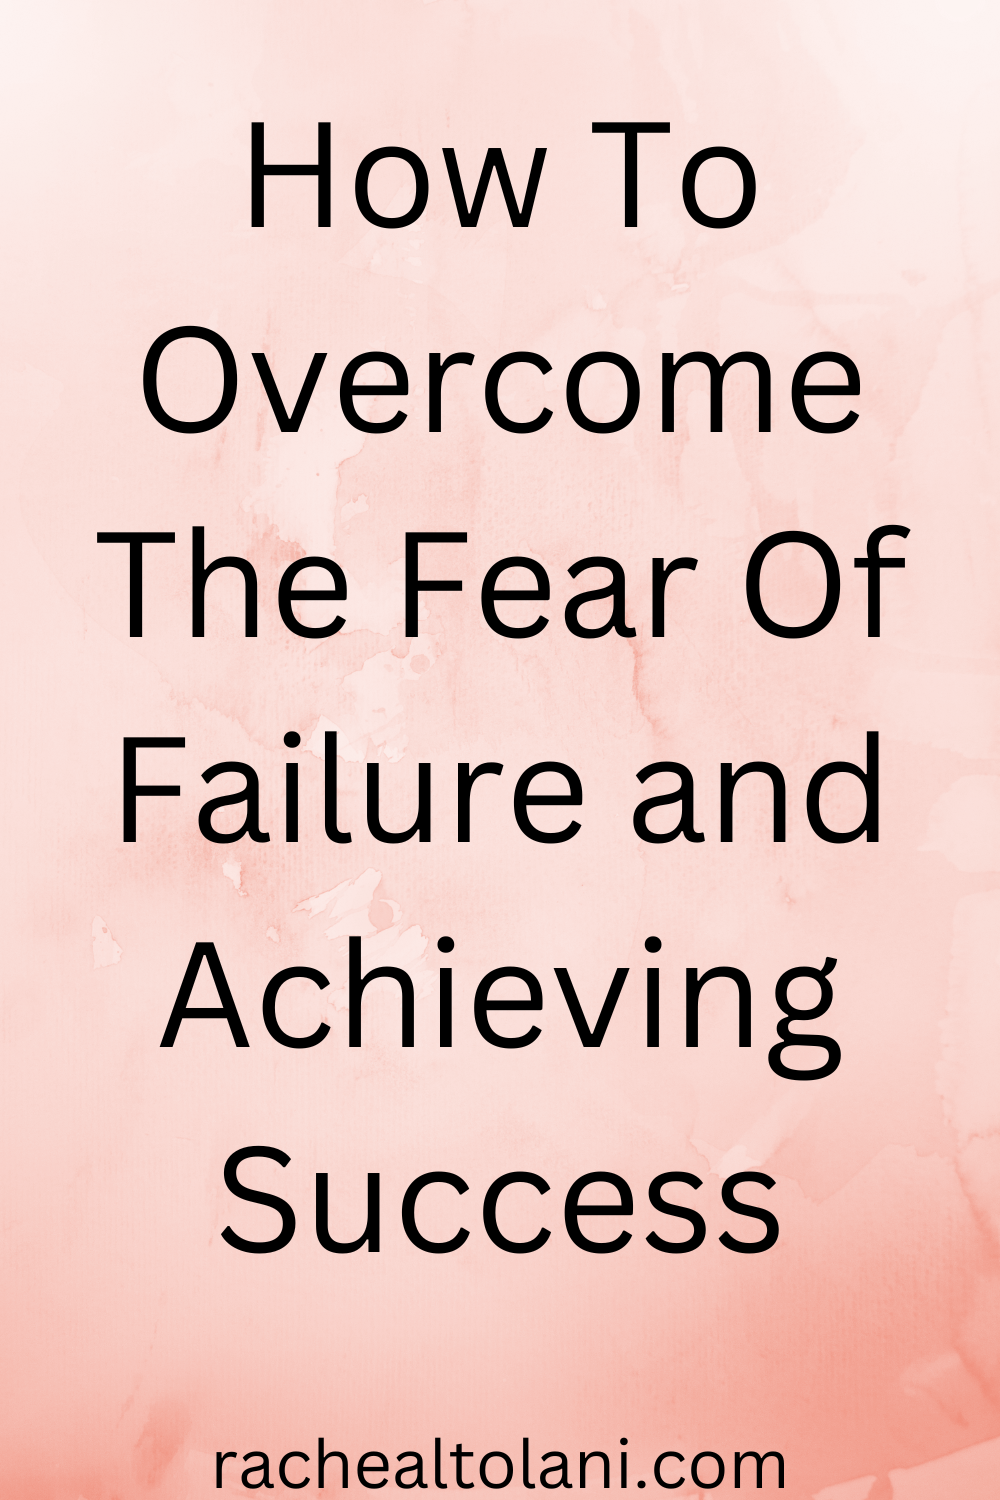 How to overcome a fear of failure